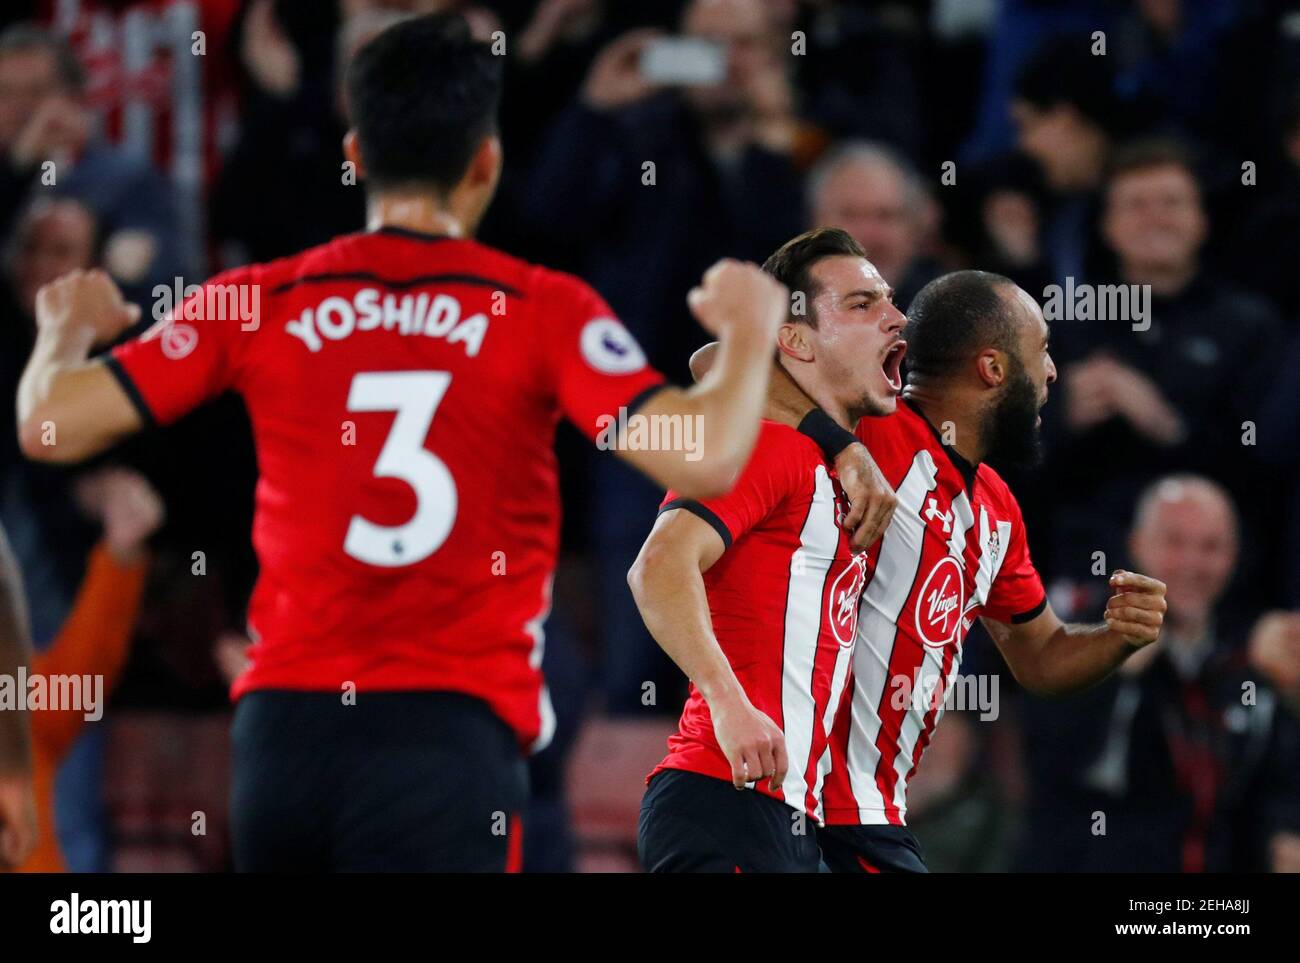 Soccer Football - Premier League - Southampton v Manchester United - St Mary's Stadium, Southampton, Britain - December 1, 2018   Southampton's Cedric Soares celebrates scoring their second goal with Nathan Redmond and Maya Yoshida    REUTERS/Eddie Keogh    EDITORIAL USE ONLY. No use with unauthorized audio, video, data, fixture lists, club/league logos or 'live' services. Online in-match use limited to 75 images, no video emulation. No use in betting, games or single club/league/player publications.  Please contact your account representative for further details. Stock Photo